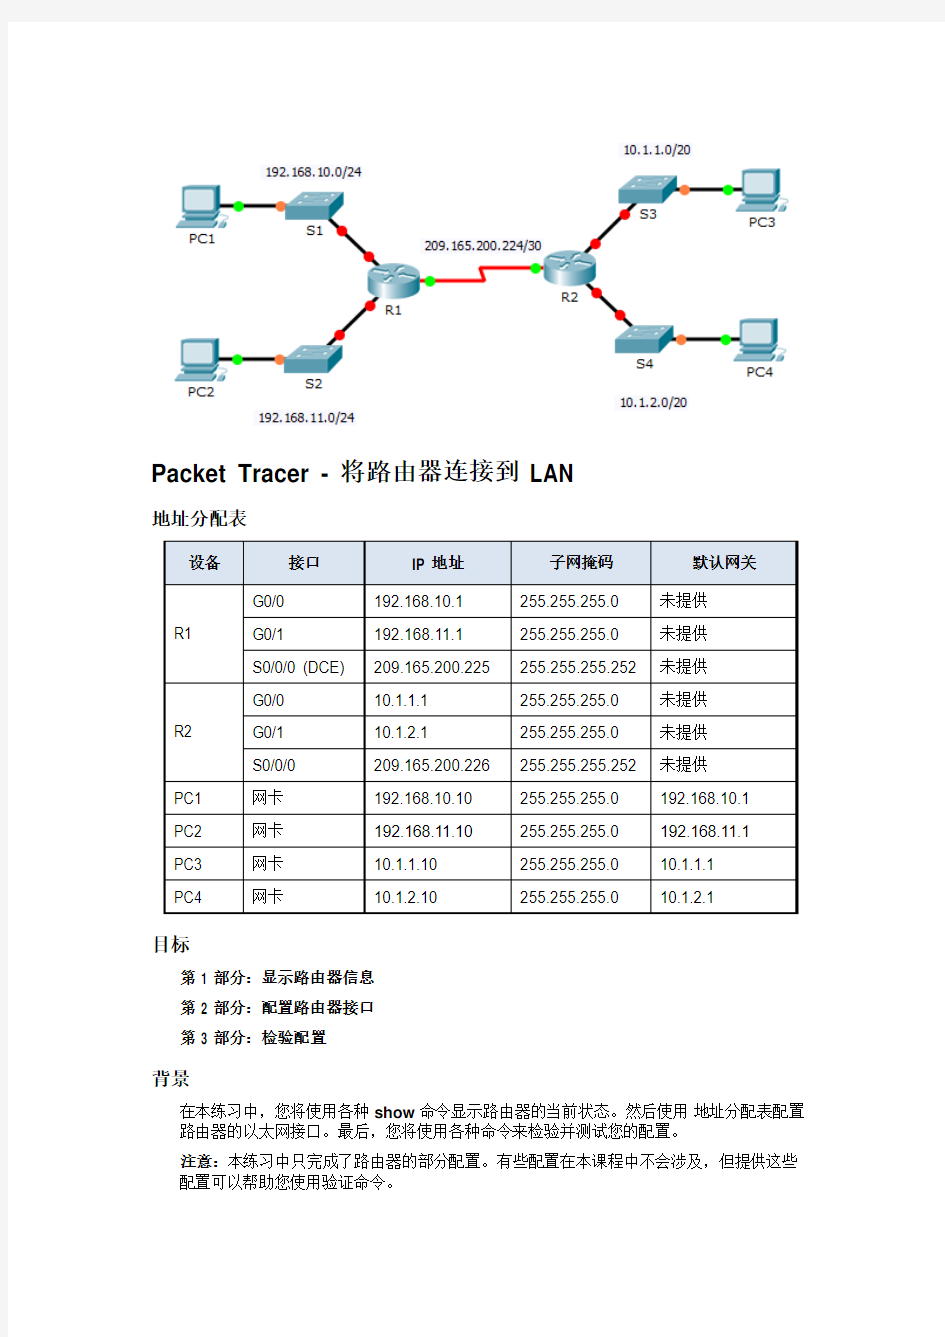 6.4.3.3 Packet Tracer - Connect a Router to a LAN 将路由器连接到 LAN